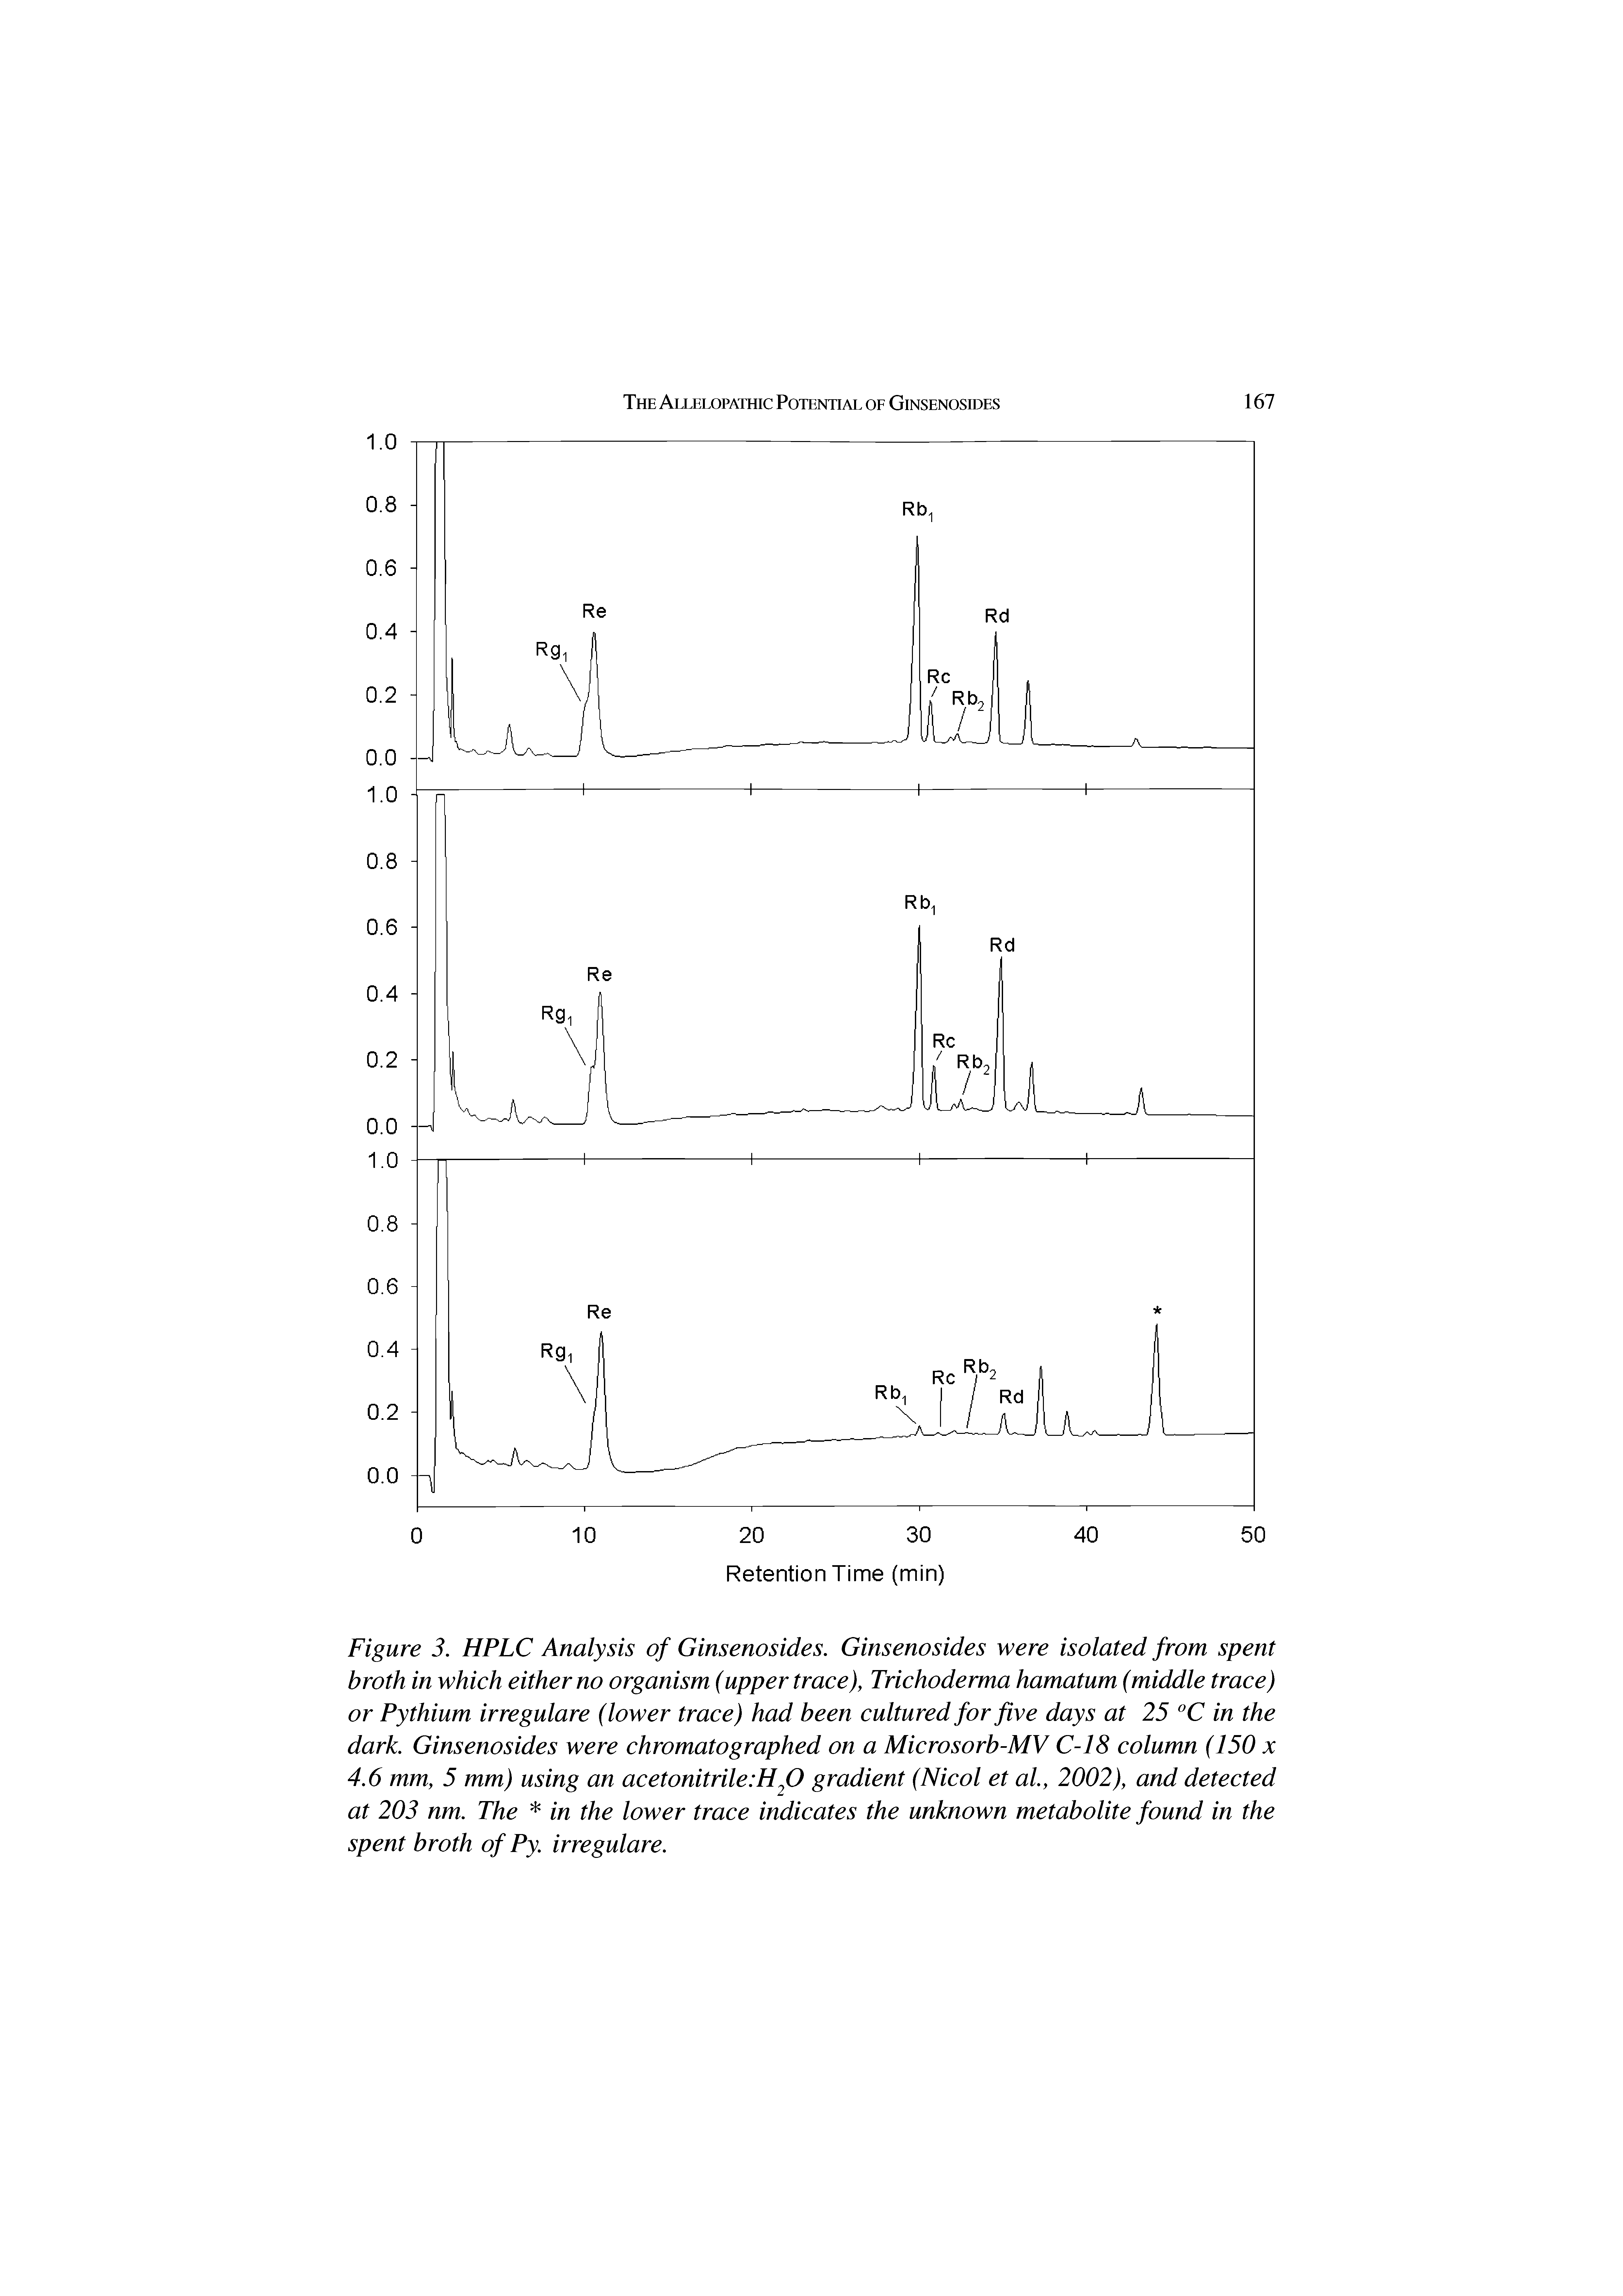 Figure 3. HPLC Analysis of Ginsenosides. Ginsenosides were isolated from spent broth in which either no organism (upper trace), Trichoderma hamatum (middle trace) or Pythium irregulare (lower trace) had been cultured for five days at 25 °C in the dark. Ginsenosides were chromatographed on a Microsorb-MV C-18 column (150 x 4.6 mm, 5 mm) using an acetonitrile H20 gradient (Nicol et al., 2002), and detected at 203 nm. The in the lower trace indicates the unknown metabolite found in the spent broth of Py. irregulare.